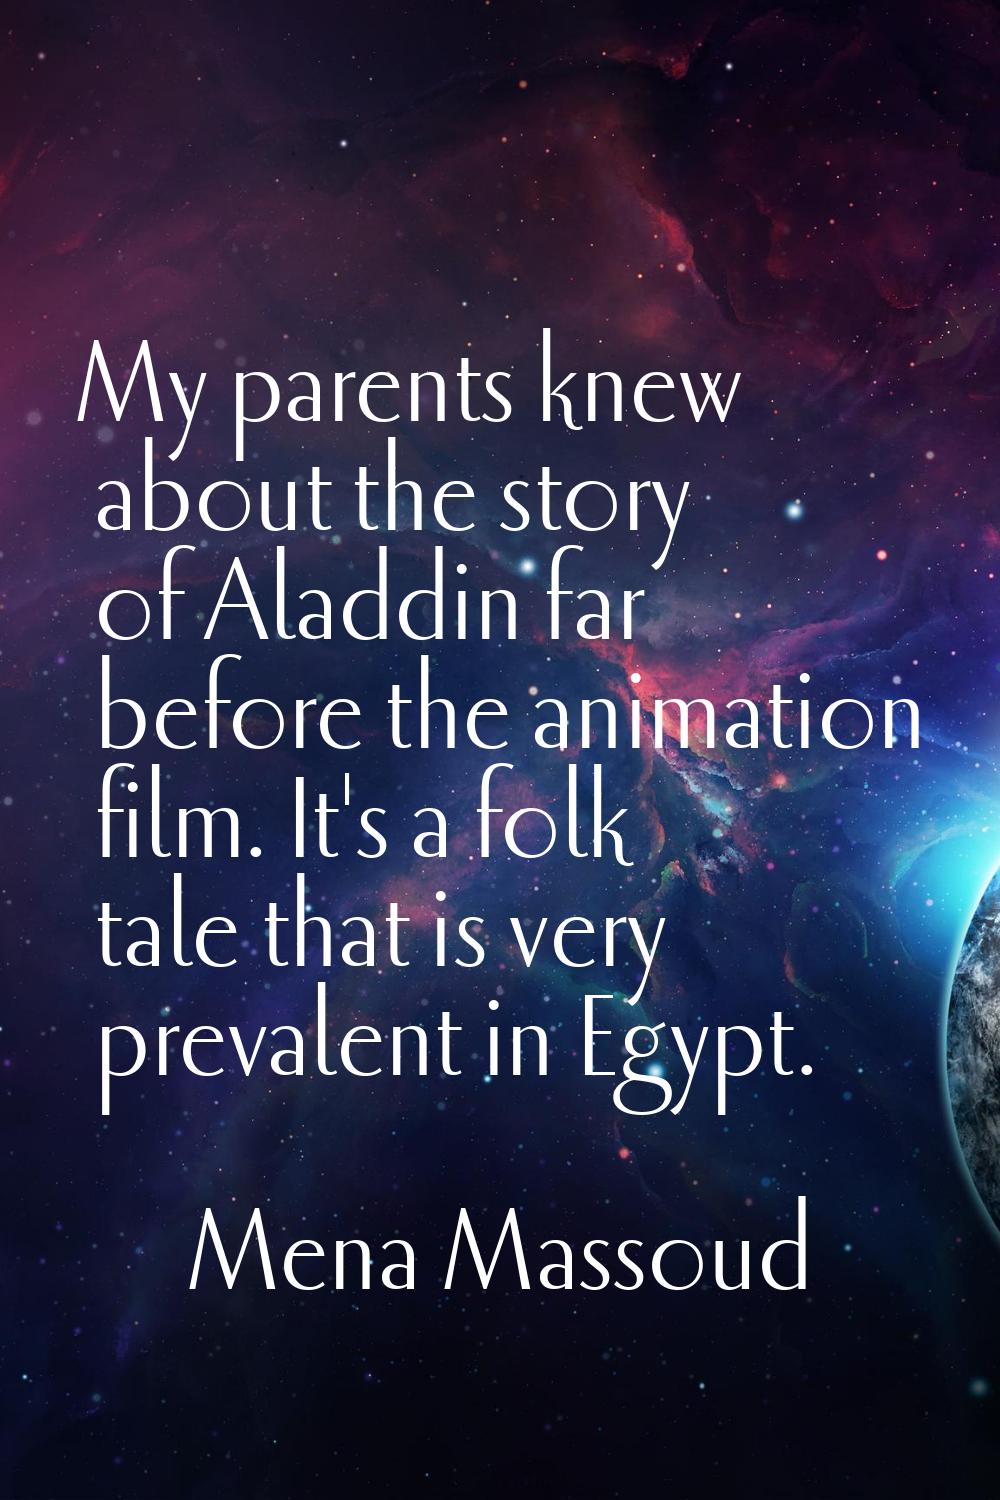 My parents knew about the story of Aladdin far before the animation film. It's a folk tale that is 